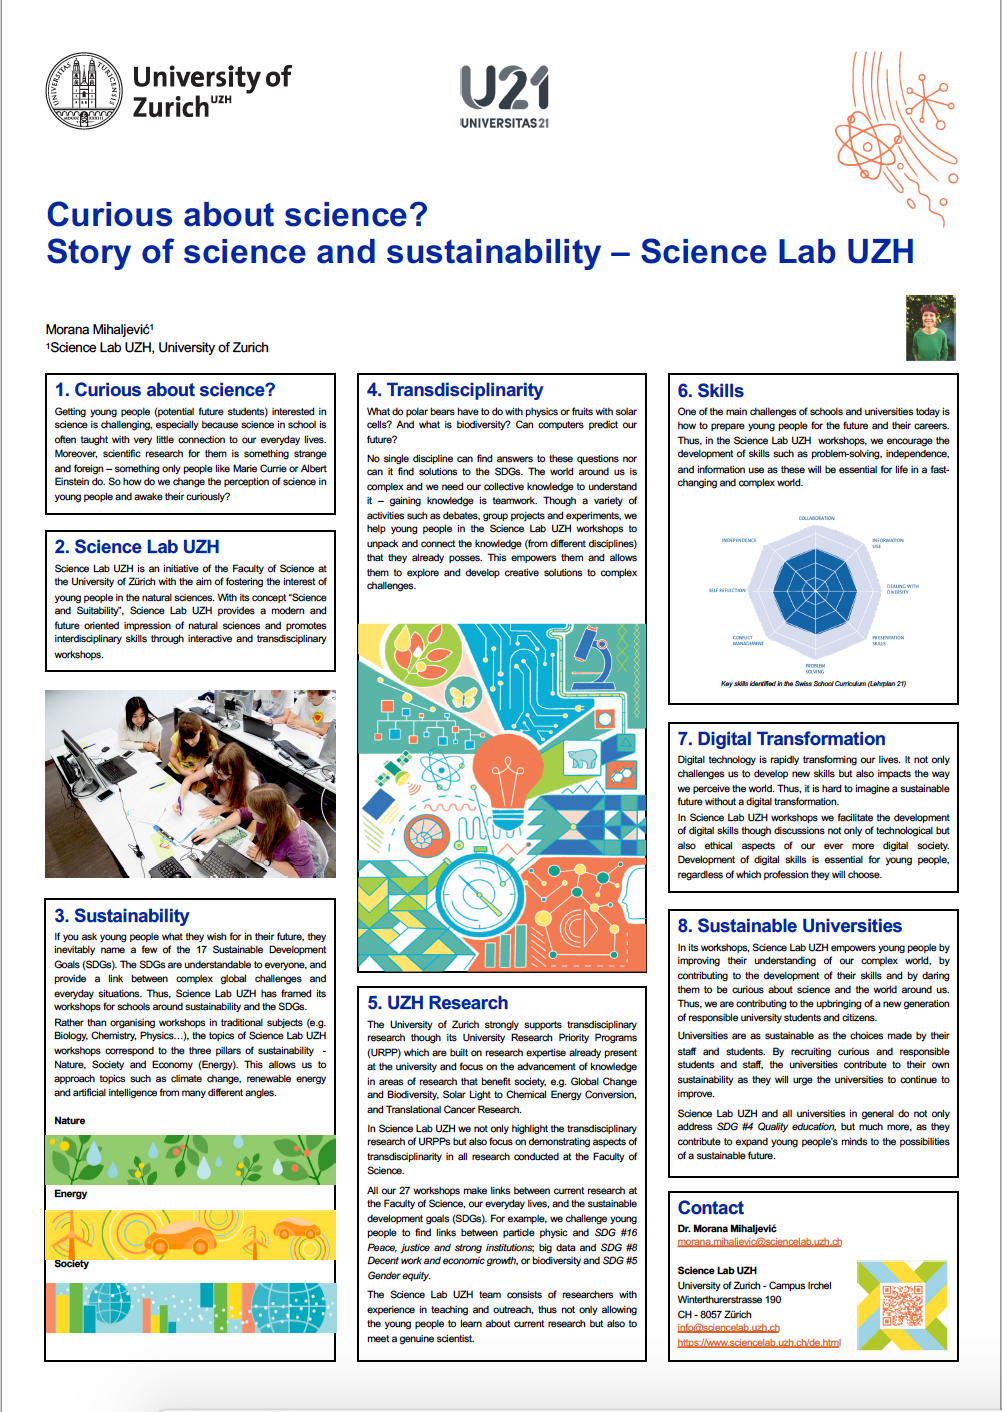 Curious about Science? Story of Science and Sustainability - Science Lab UZH - Morana Mihaljević